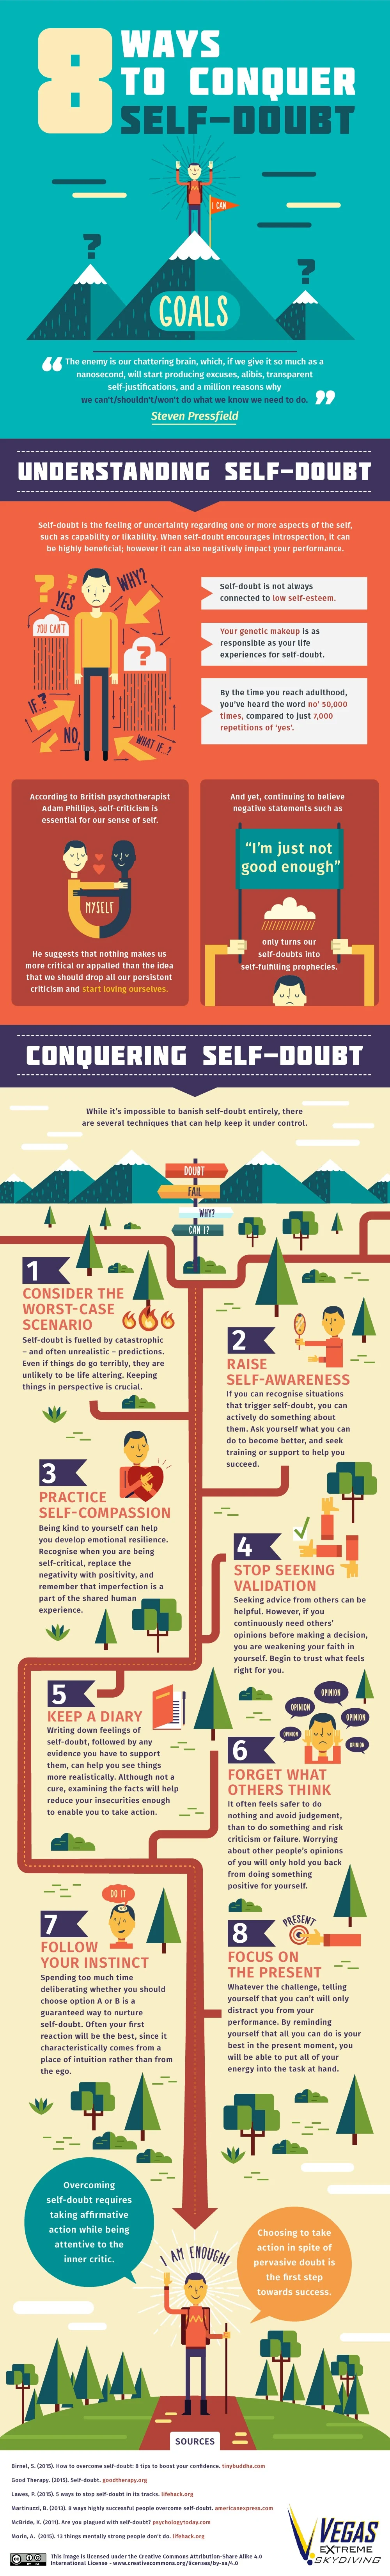 8 Ways To Conquer Self-Doubt - #infographic